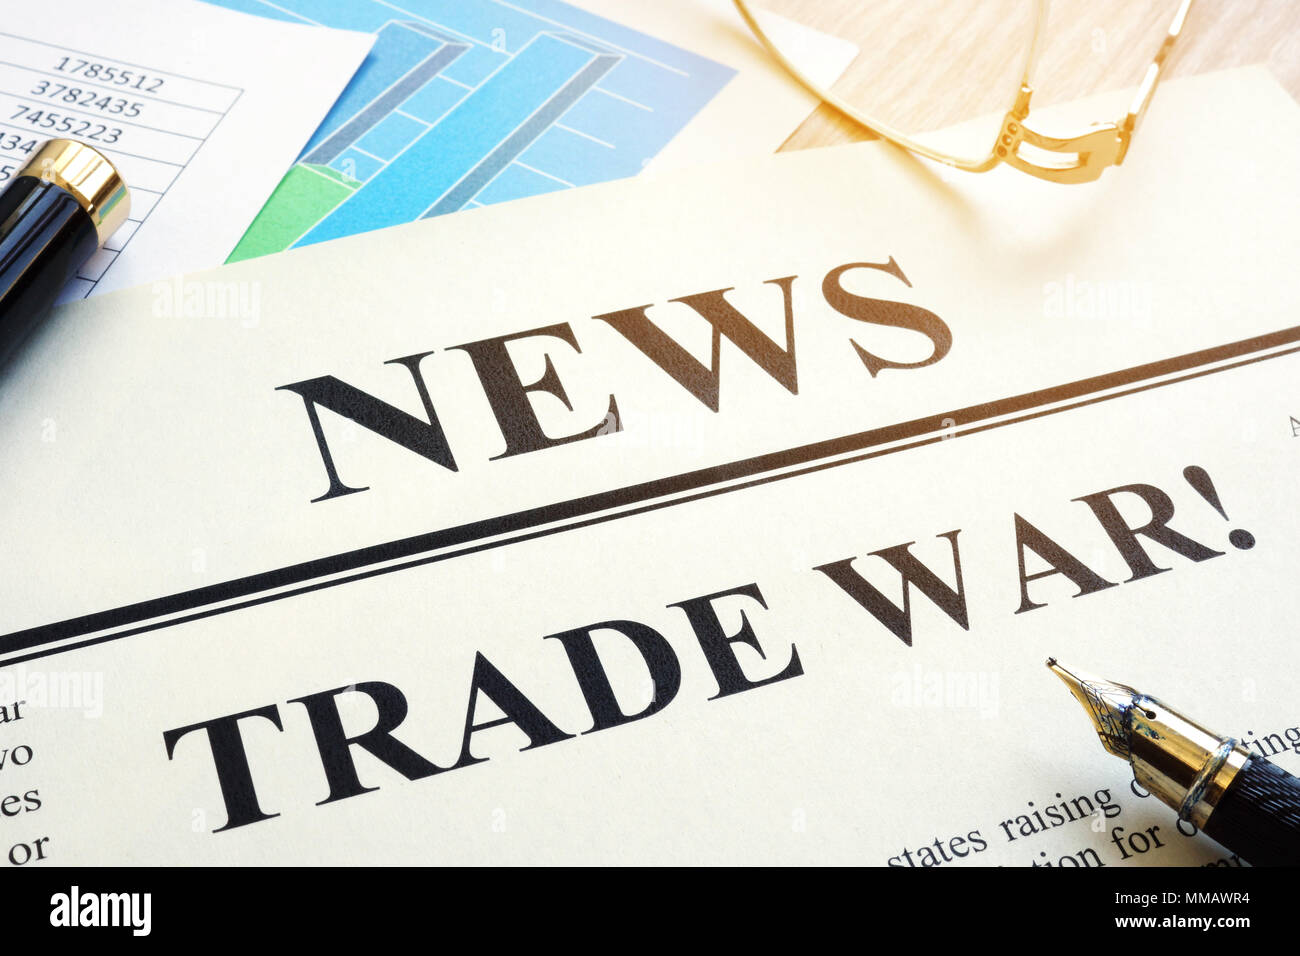 Newspaper with title Trade war on a desk. Stock Photo